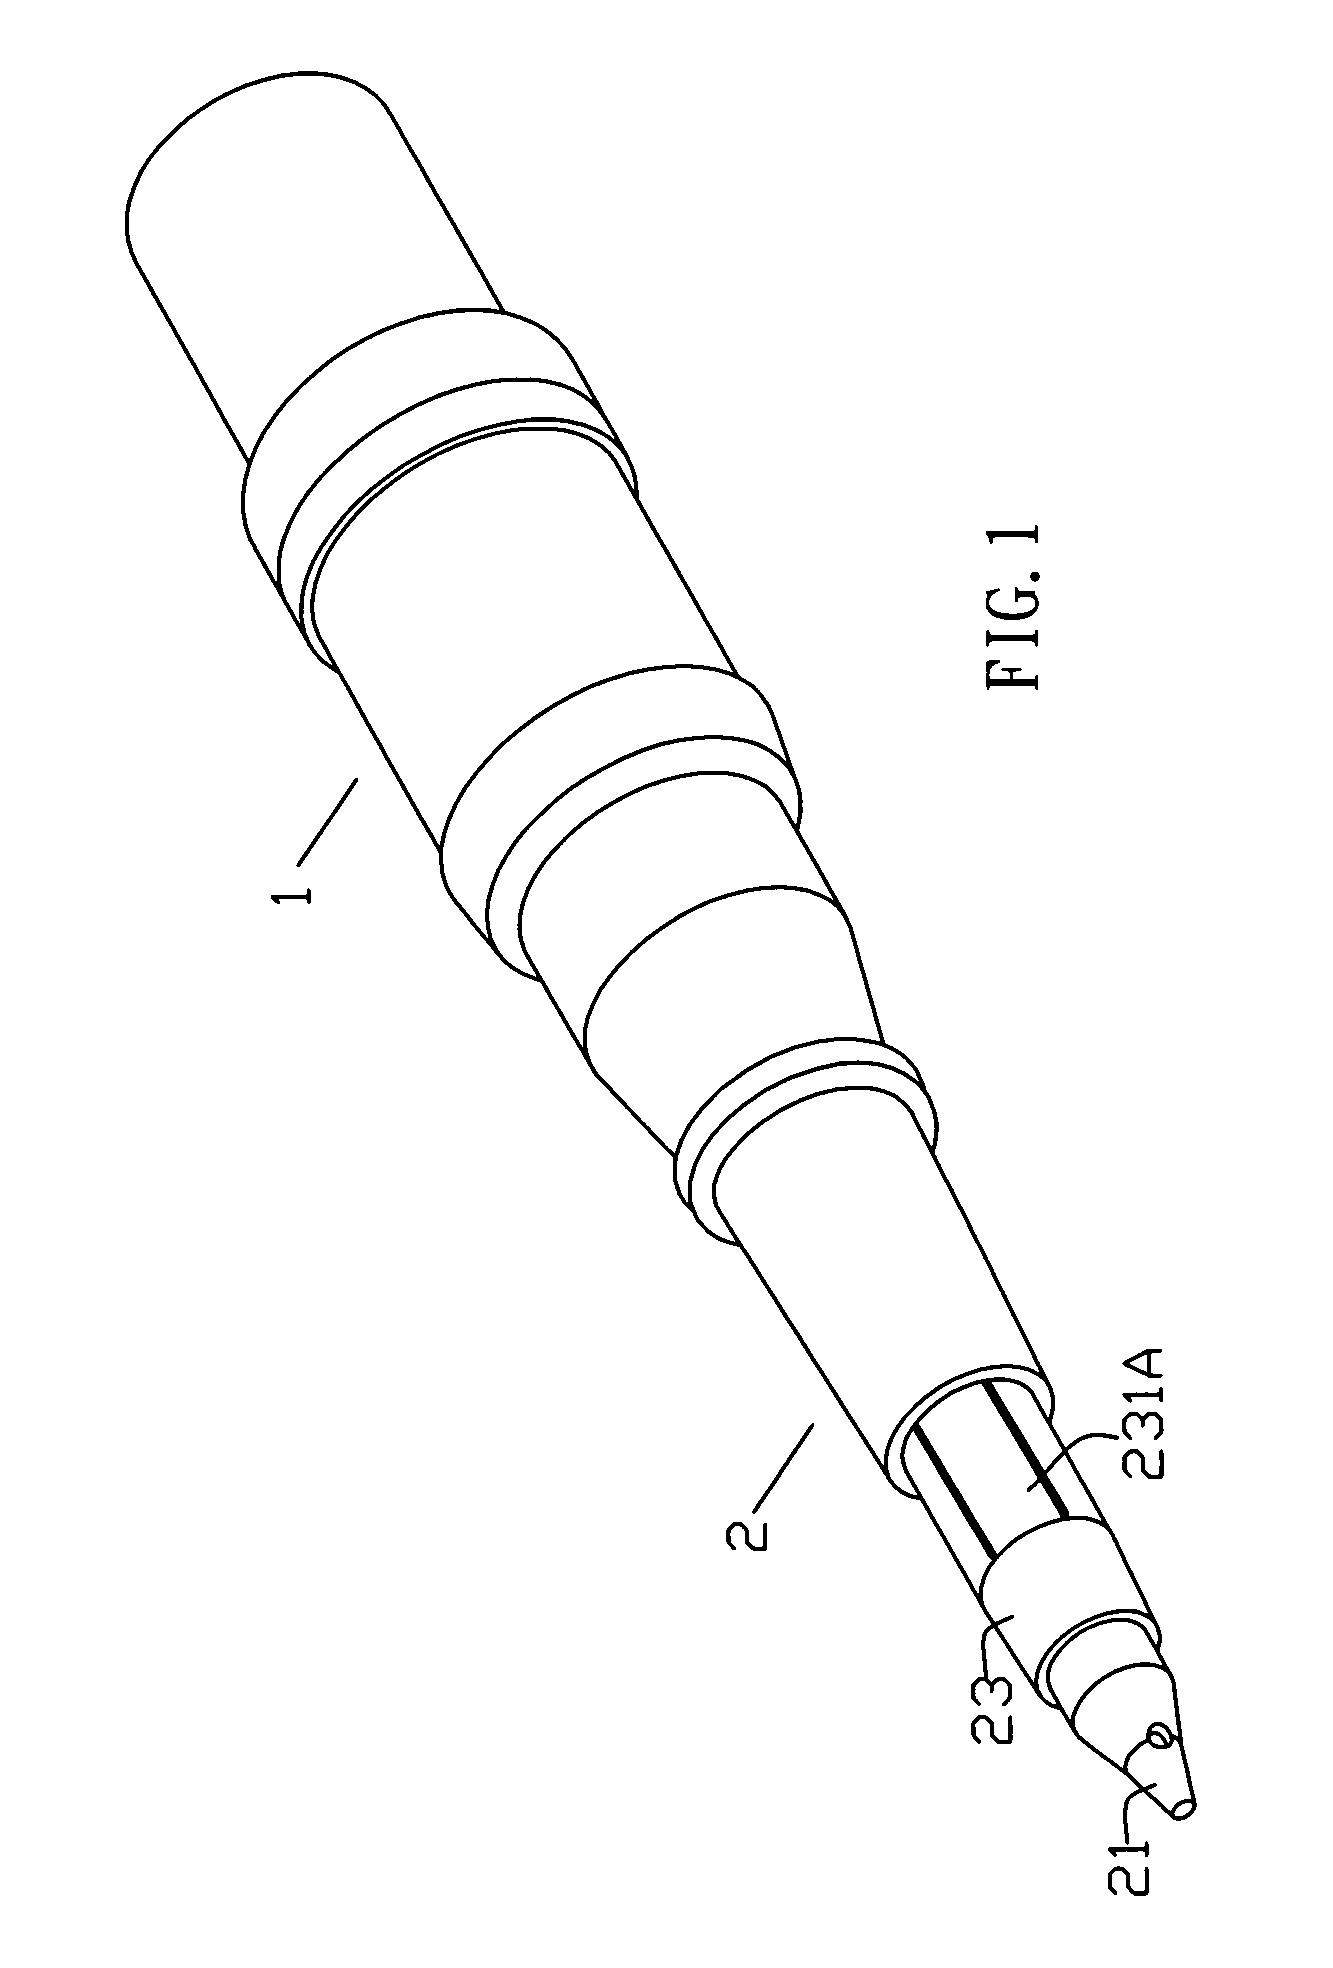 Safety needle device for tattooing body and eyebrows